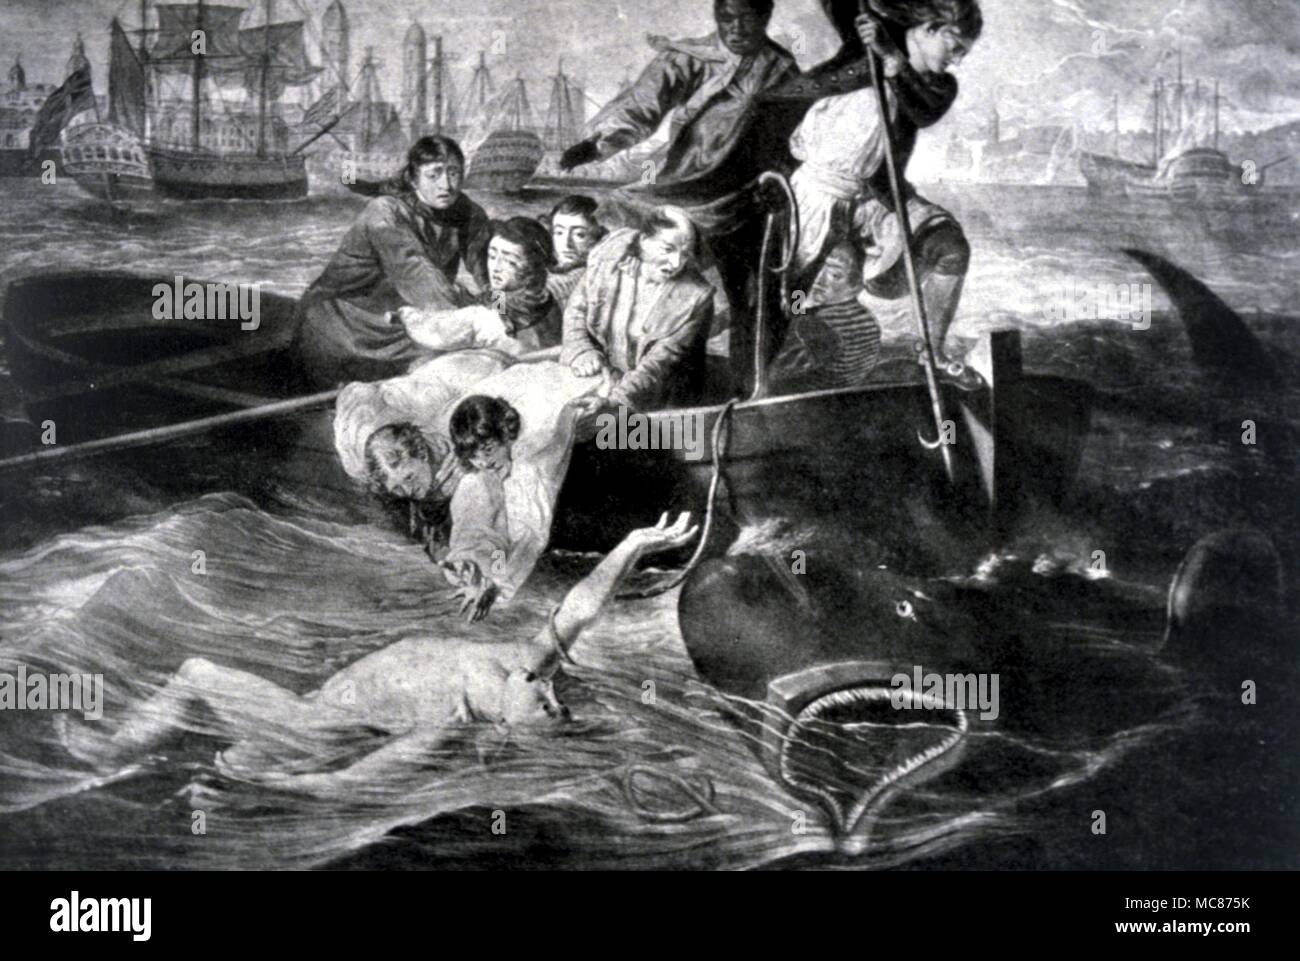 MONSTERS 'Youth Rescued From A Shark'. Reproduction of mezzotint by Valentine Green, after the painting by John Singleton Copley, 1779 Stock Photo